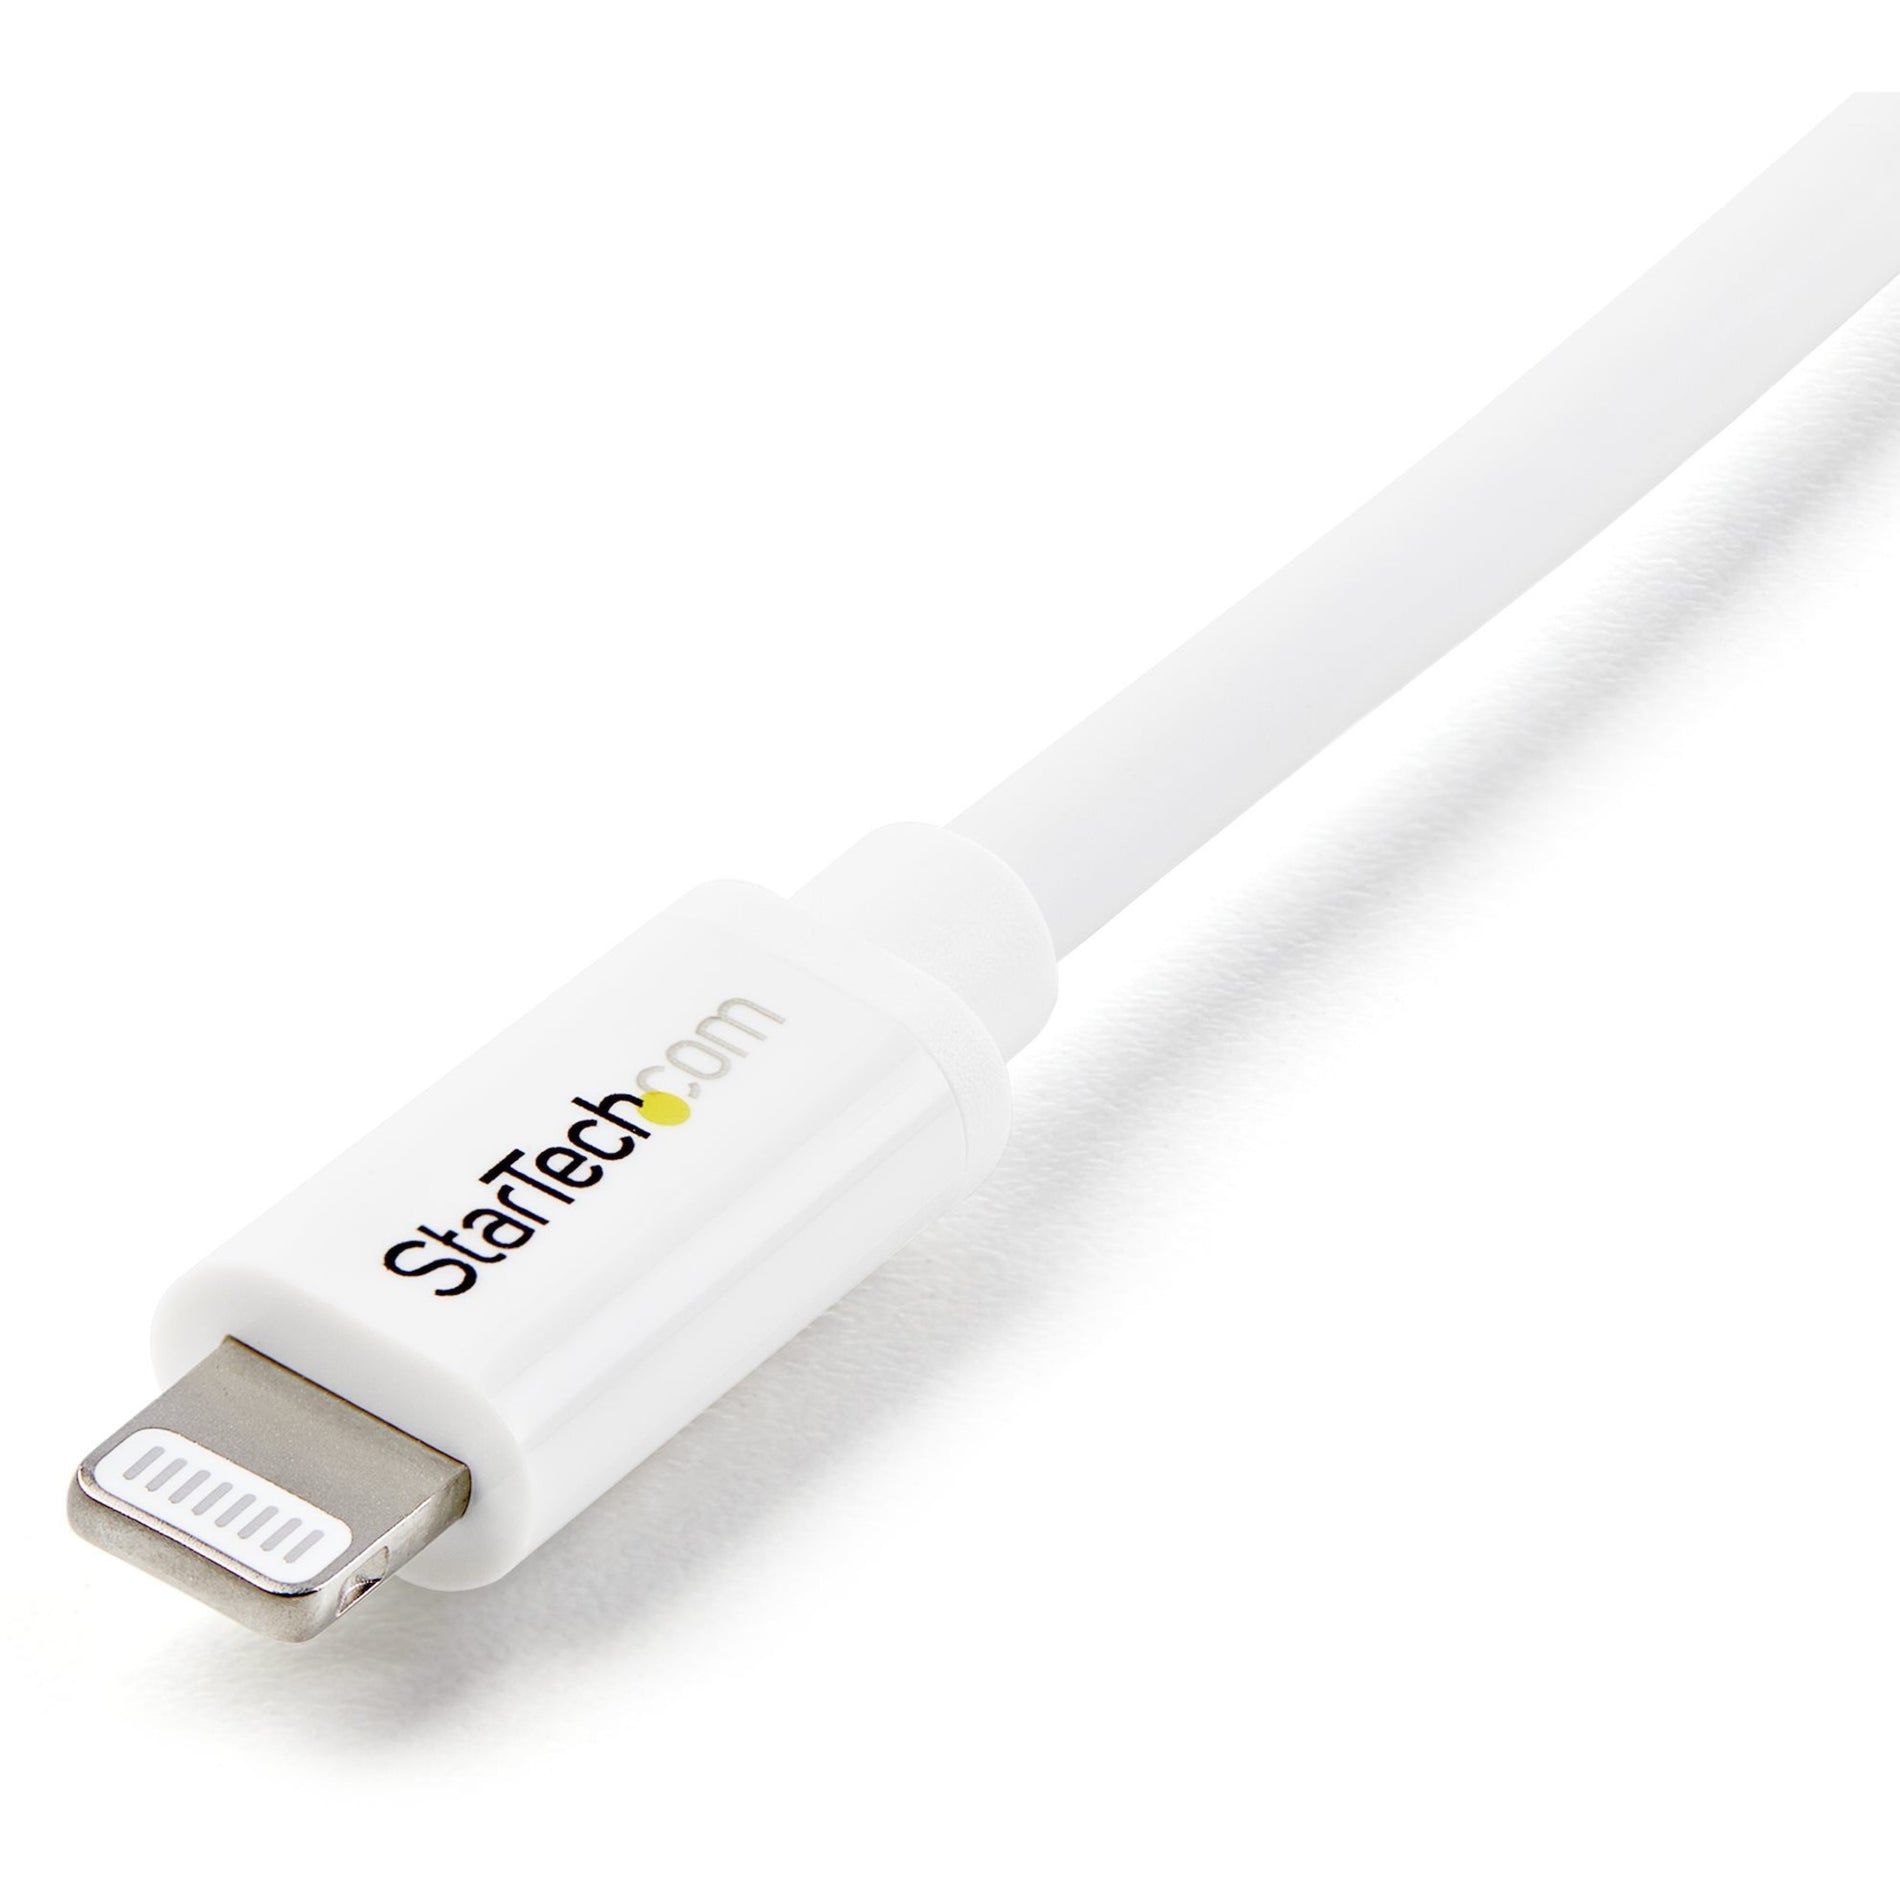 StarTech.com USBLT1MW Sync/Charge Lightning/USB Data Transfer Cable, 3ft, White